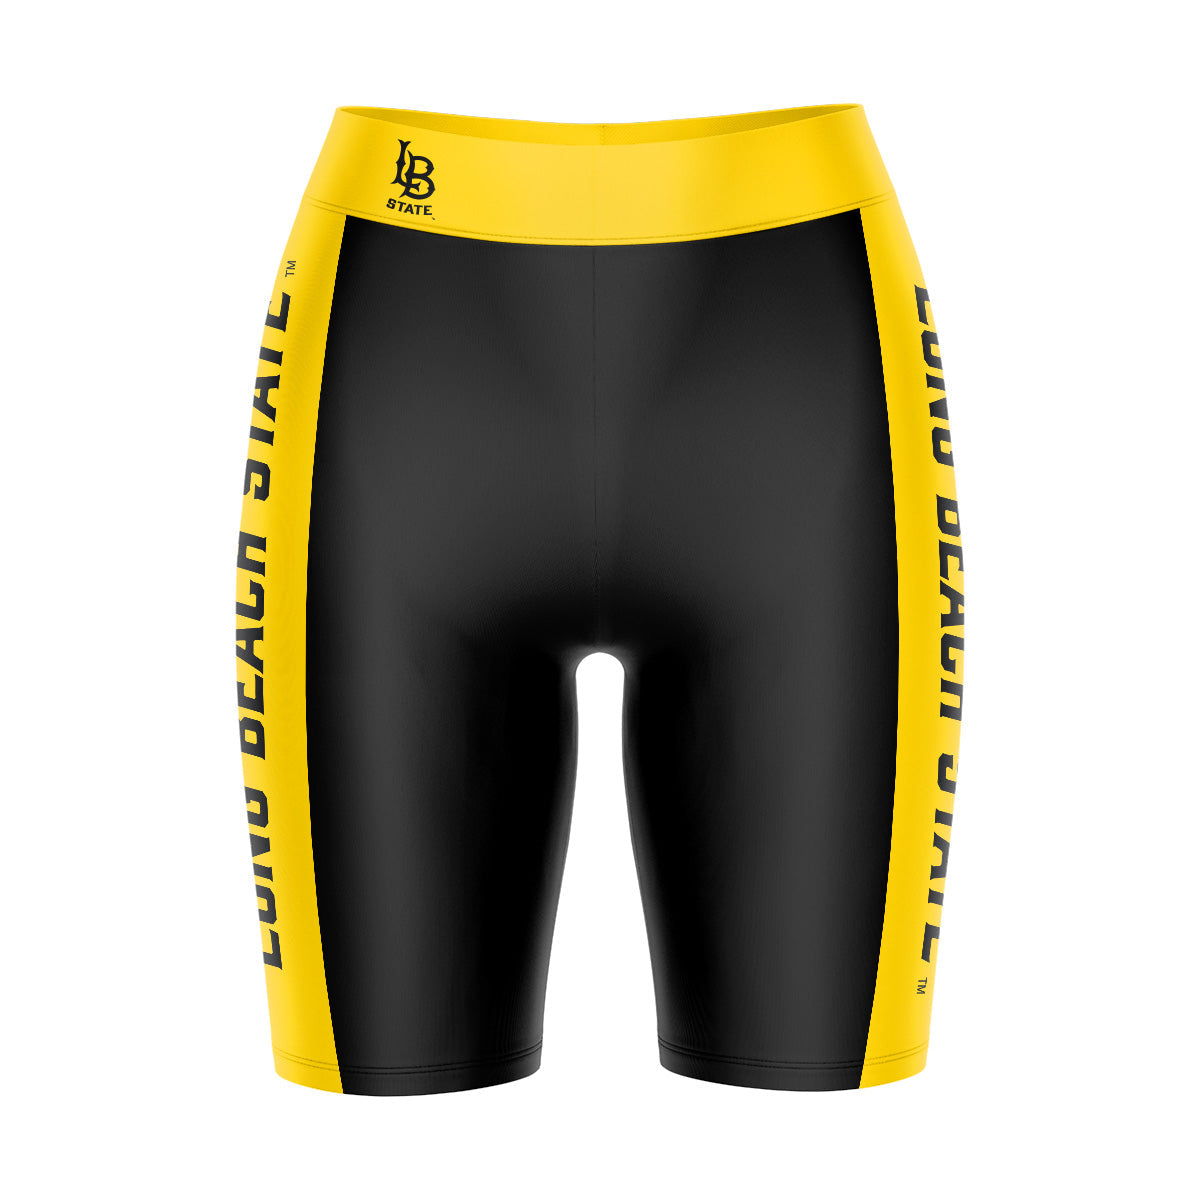 Cal State Long Beach 49ers Vive La Fete Game Day Logo on Waistband and Gold Stripes Black Women Bike Short 9 Inseam